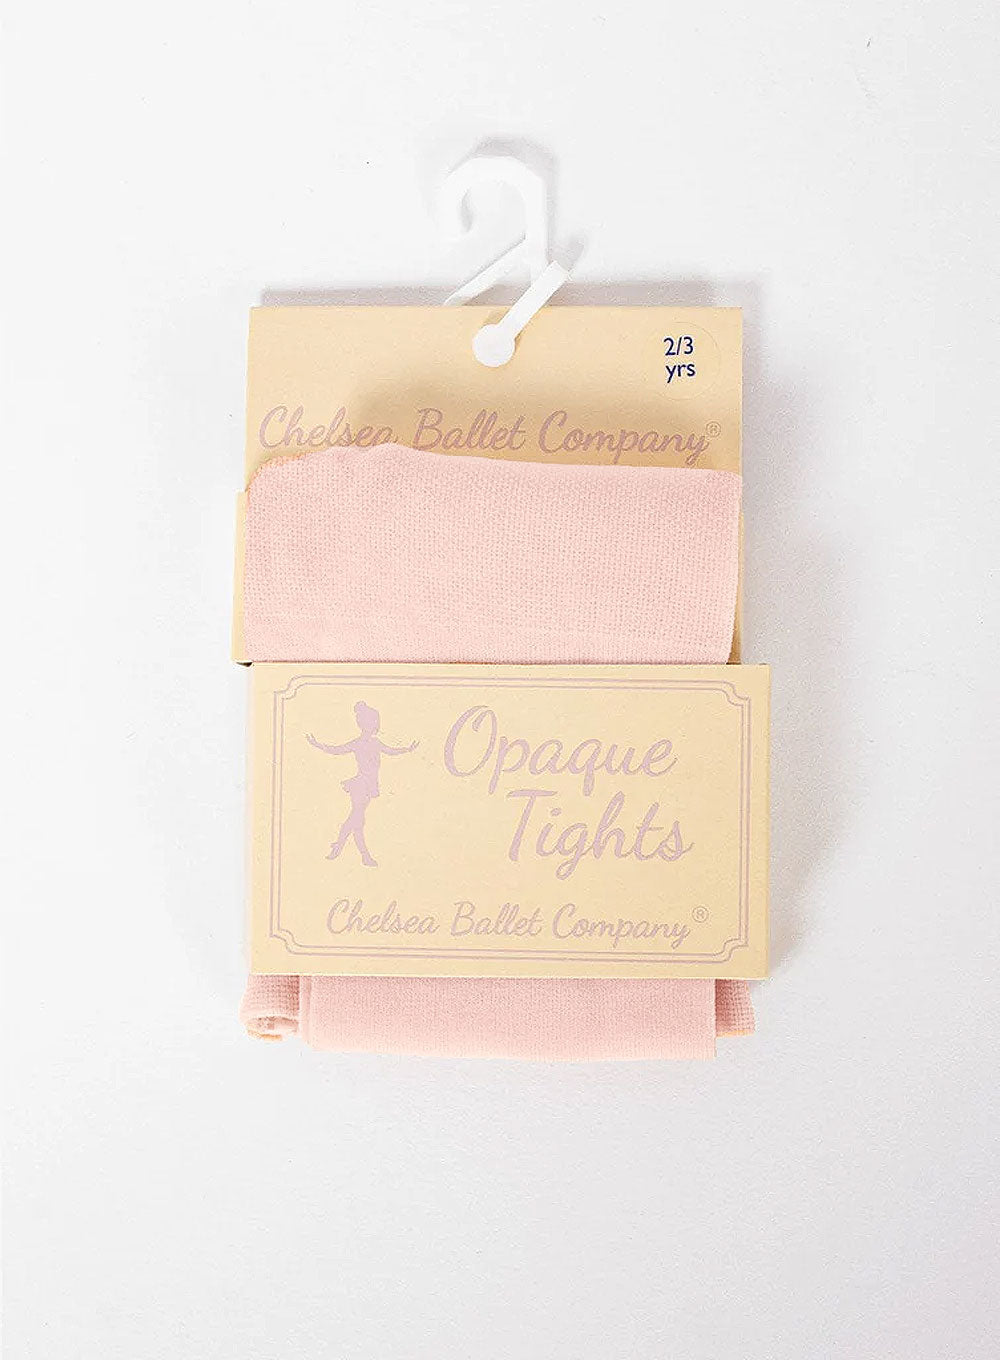 Opaque Tights in Blush Pink